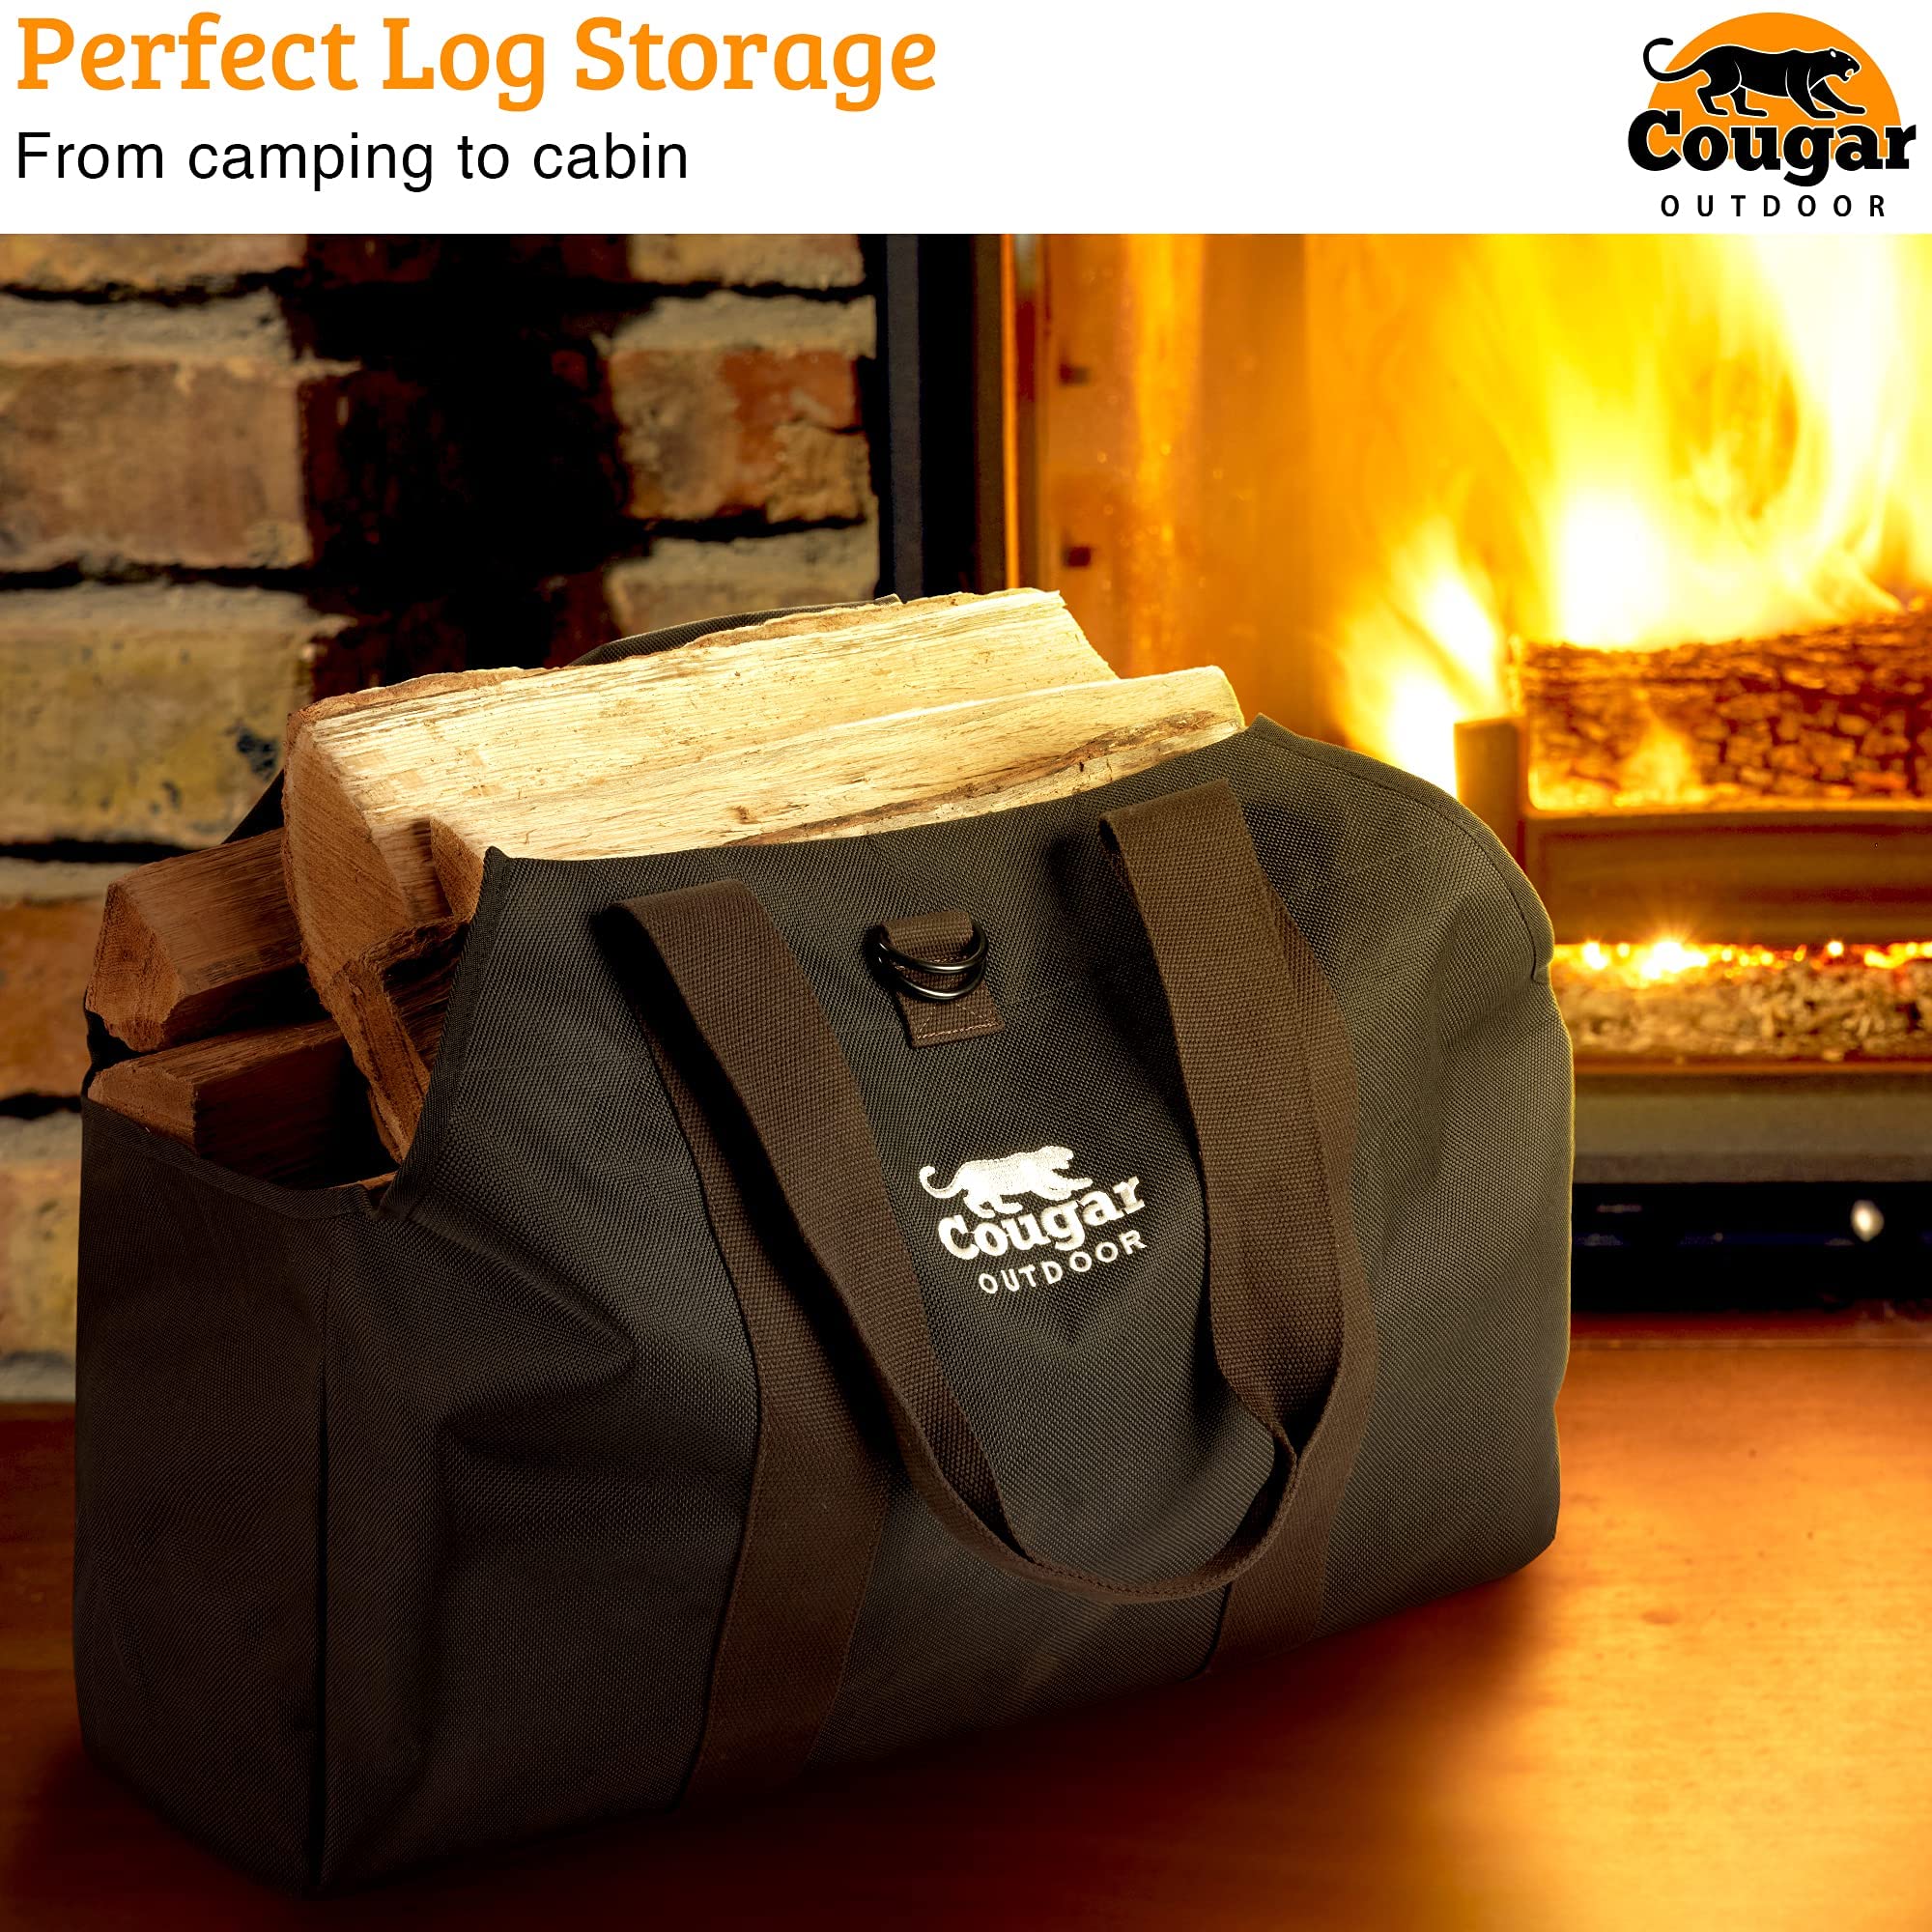 Cougar Outdoor Firewood Carrier Log Carrier (Black) – Waterproof, Heavy Duty, XXL Capacity Canvas Wood Carrying Bag for Firewood, Camping, Wood Fire Stove & Fireplace Gift for Him Idea